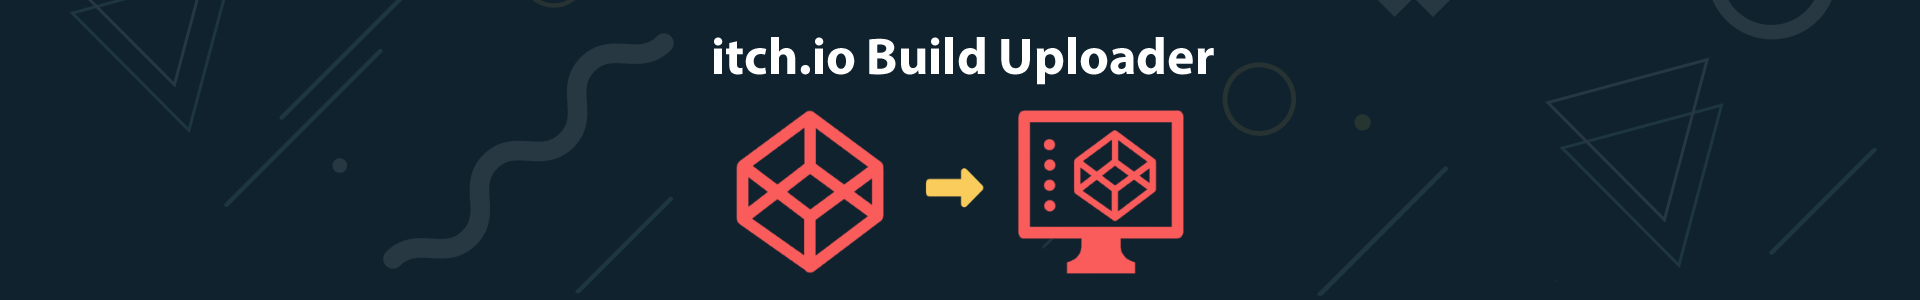 itch.io Build Uploader for Unity3D